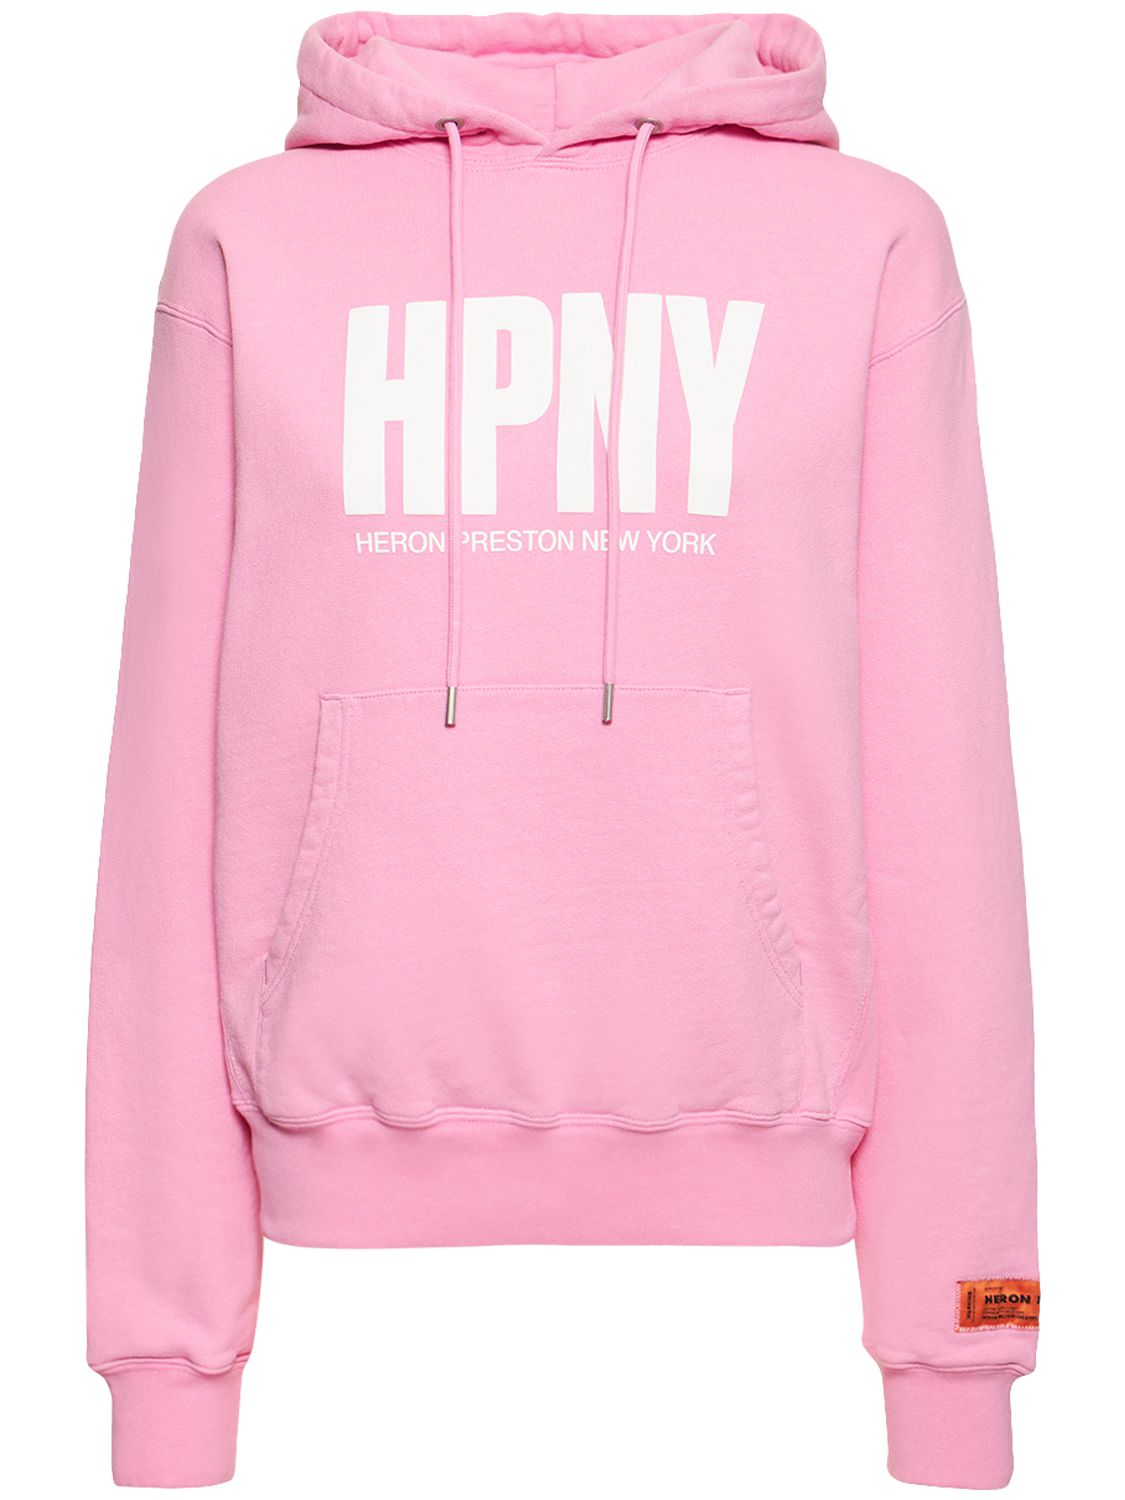 Hpny Cotton Jersey Hoodie